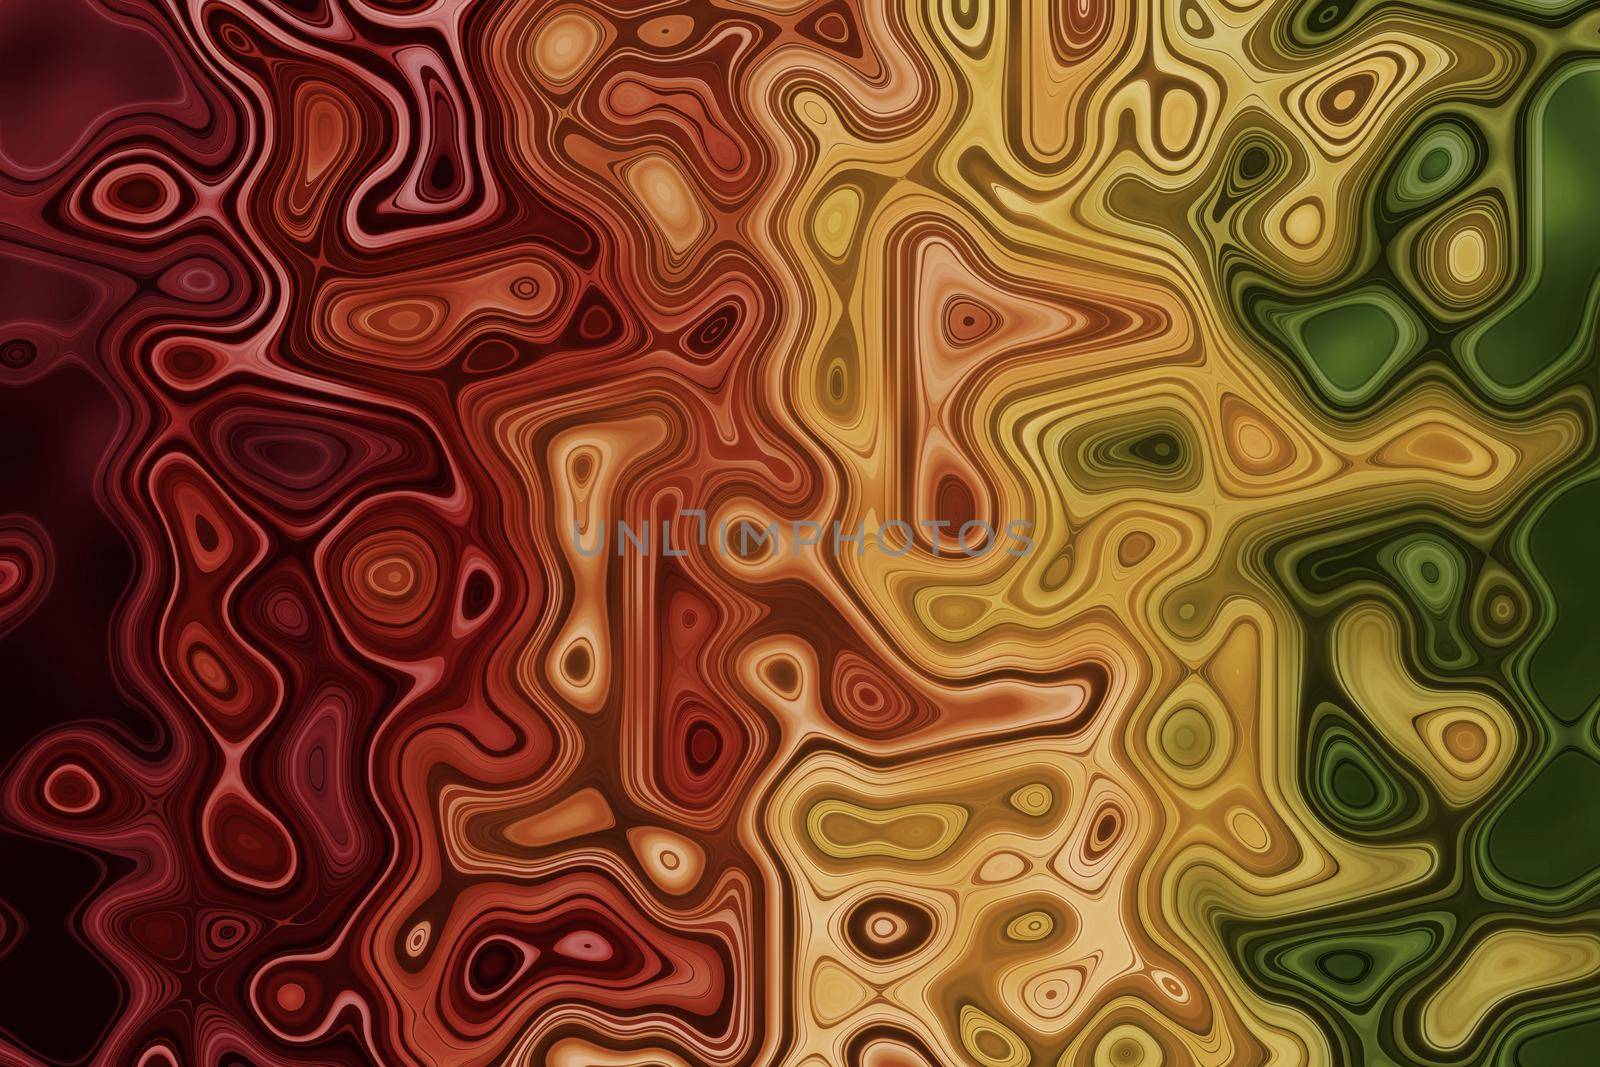 Abstract variegated background with concentric lines and spheres by Bezdnatm